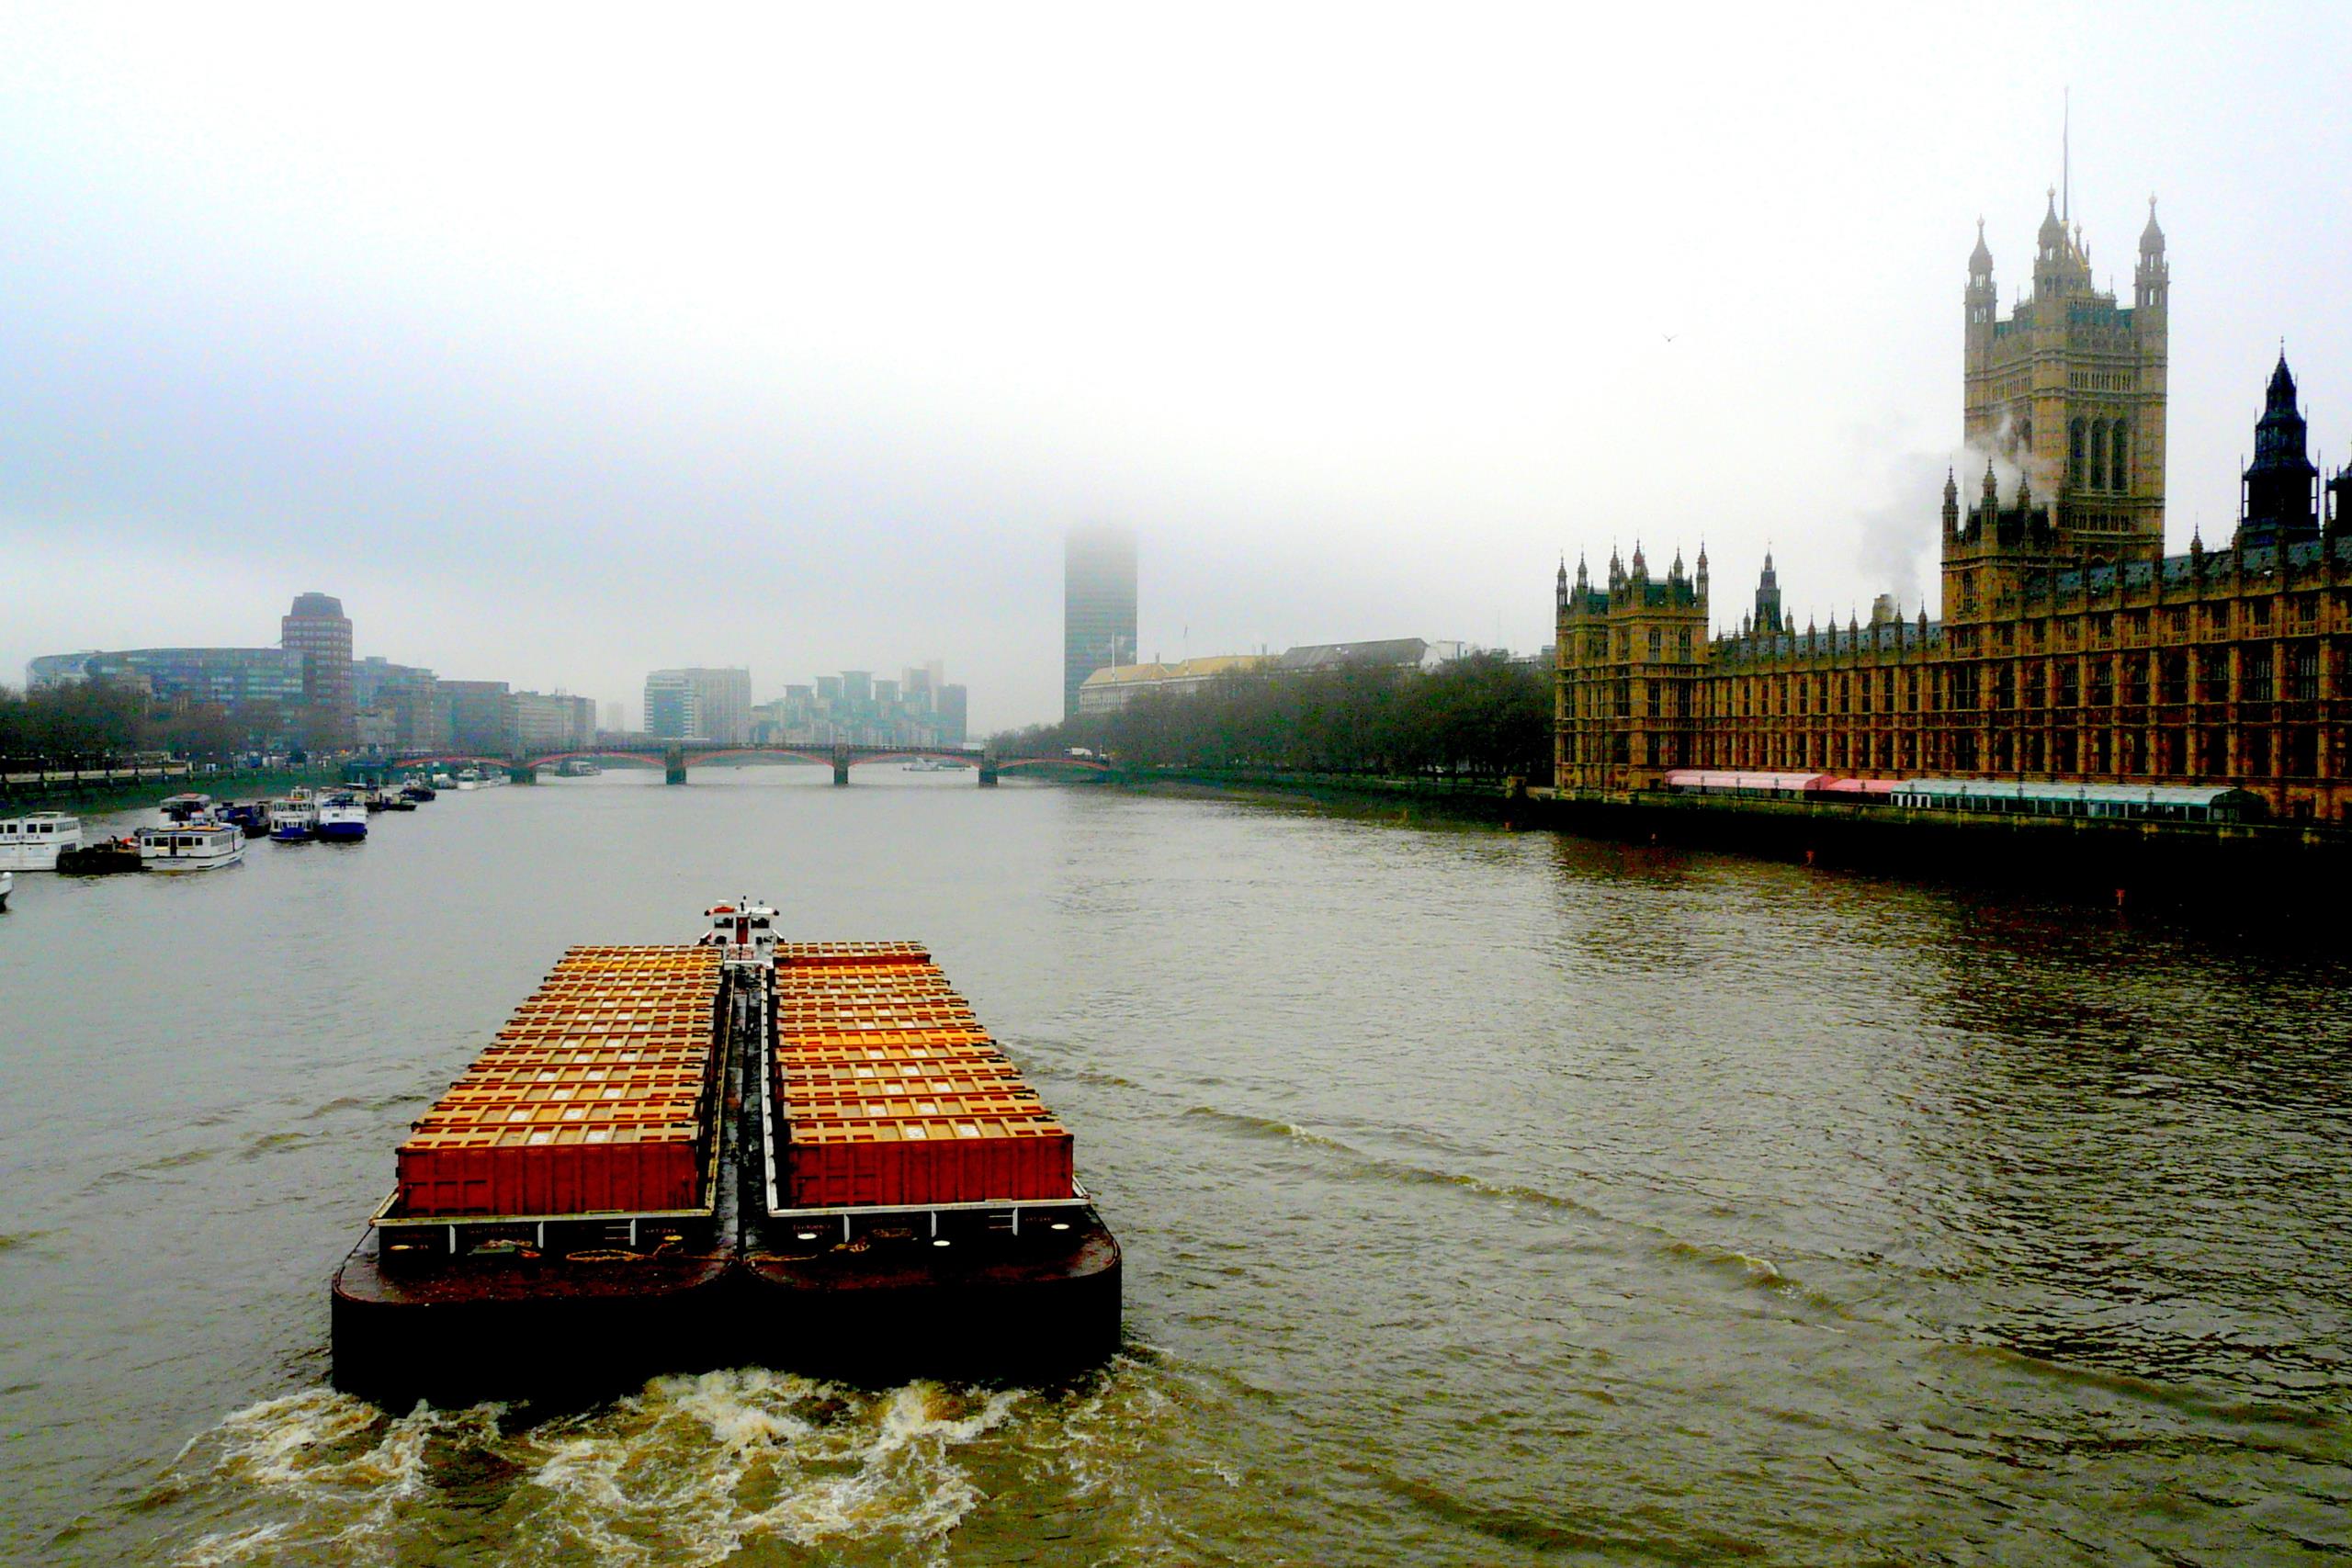 Boat pulling cargo on The River Thames